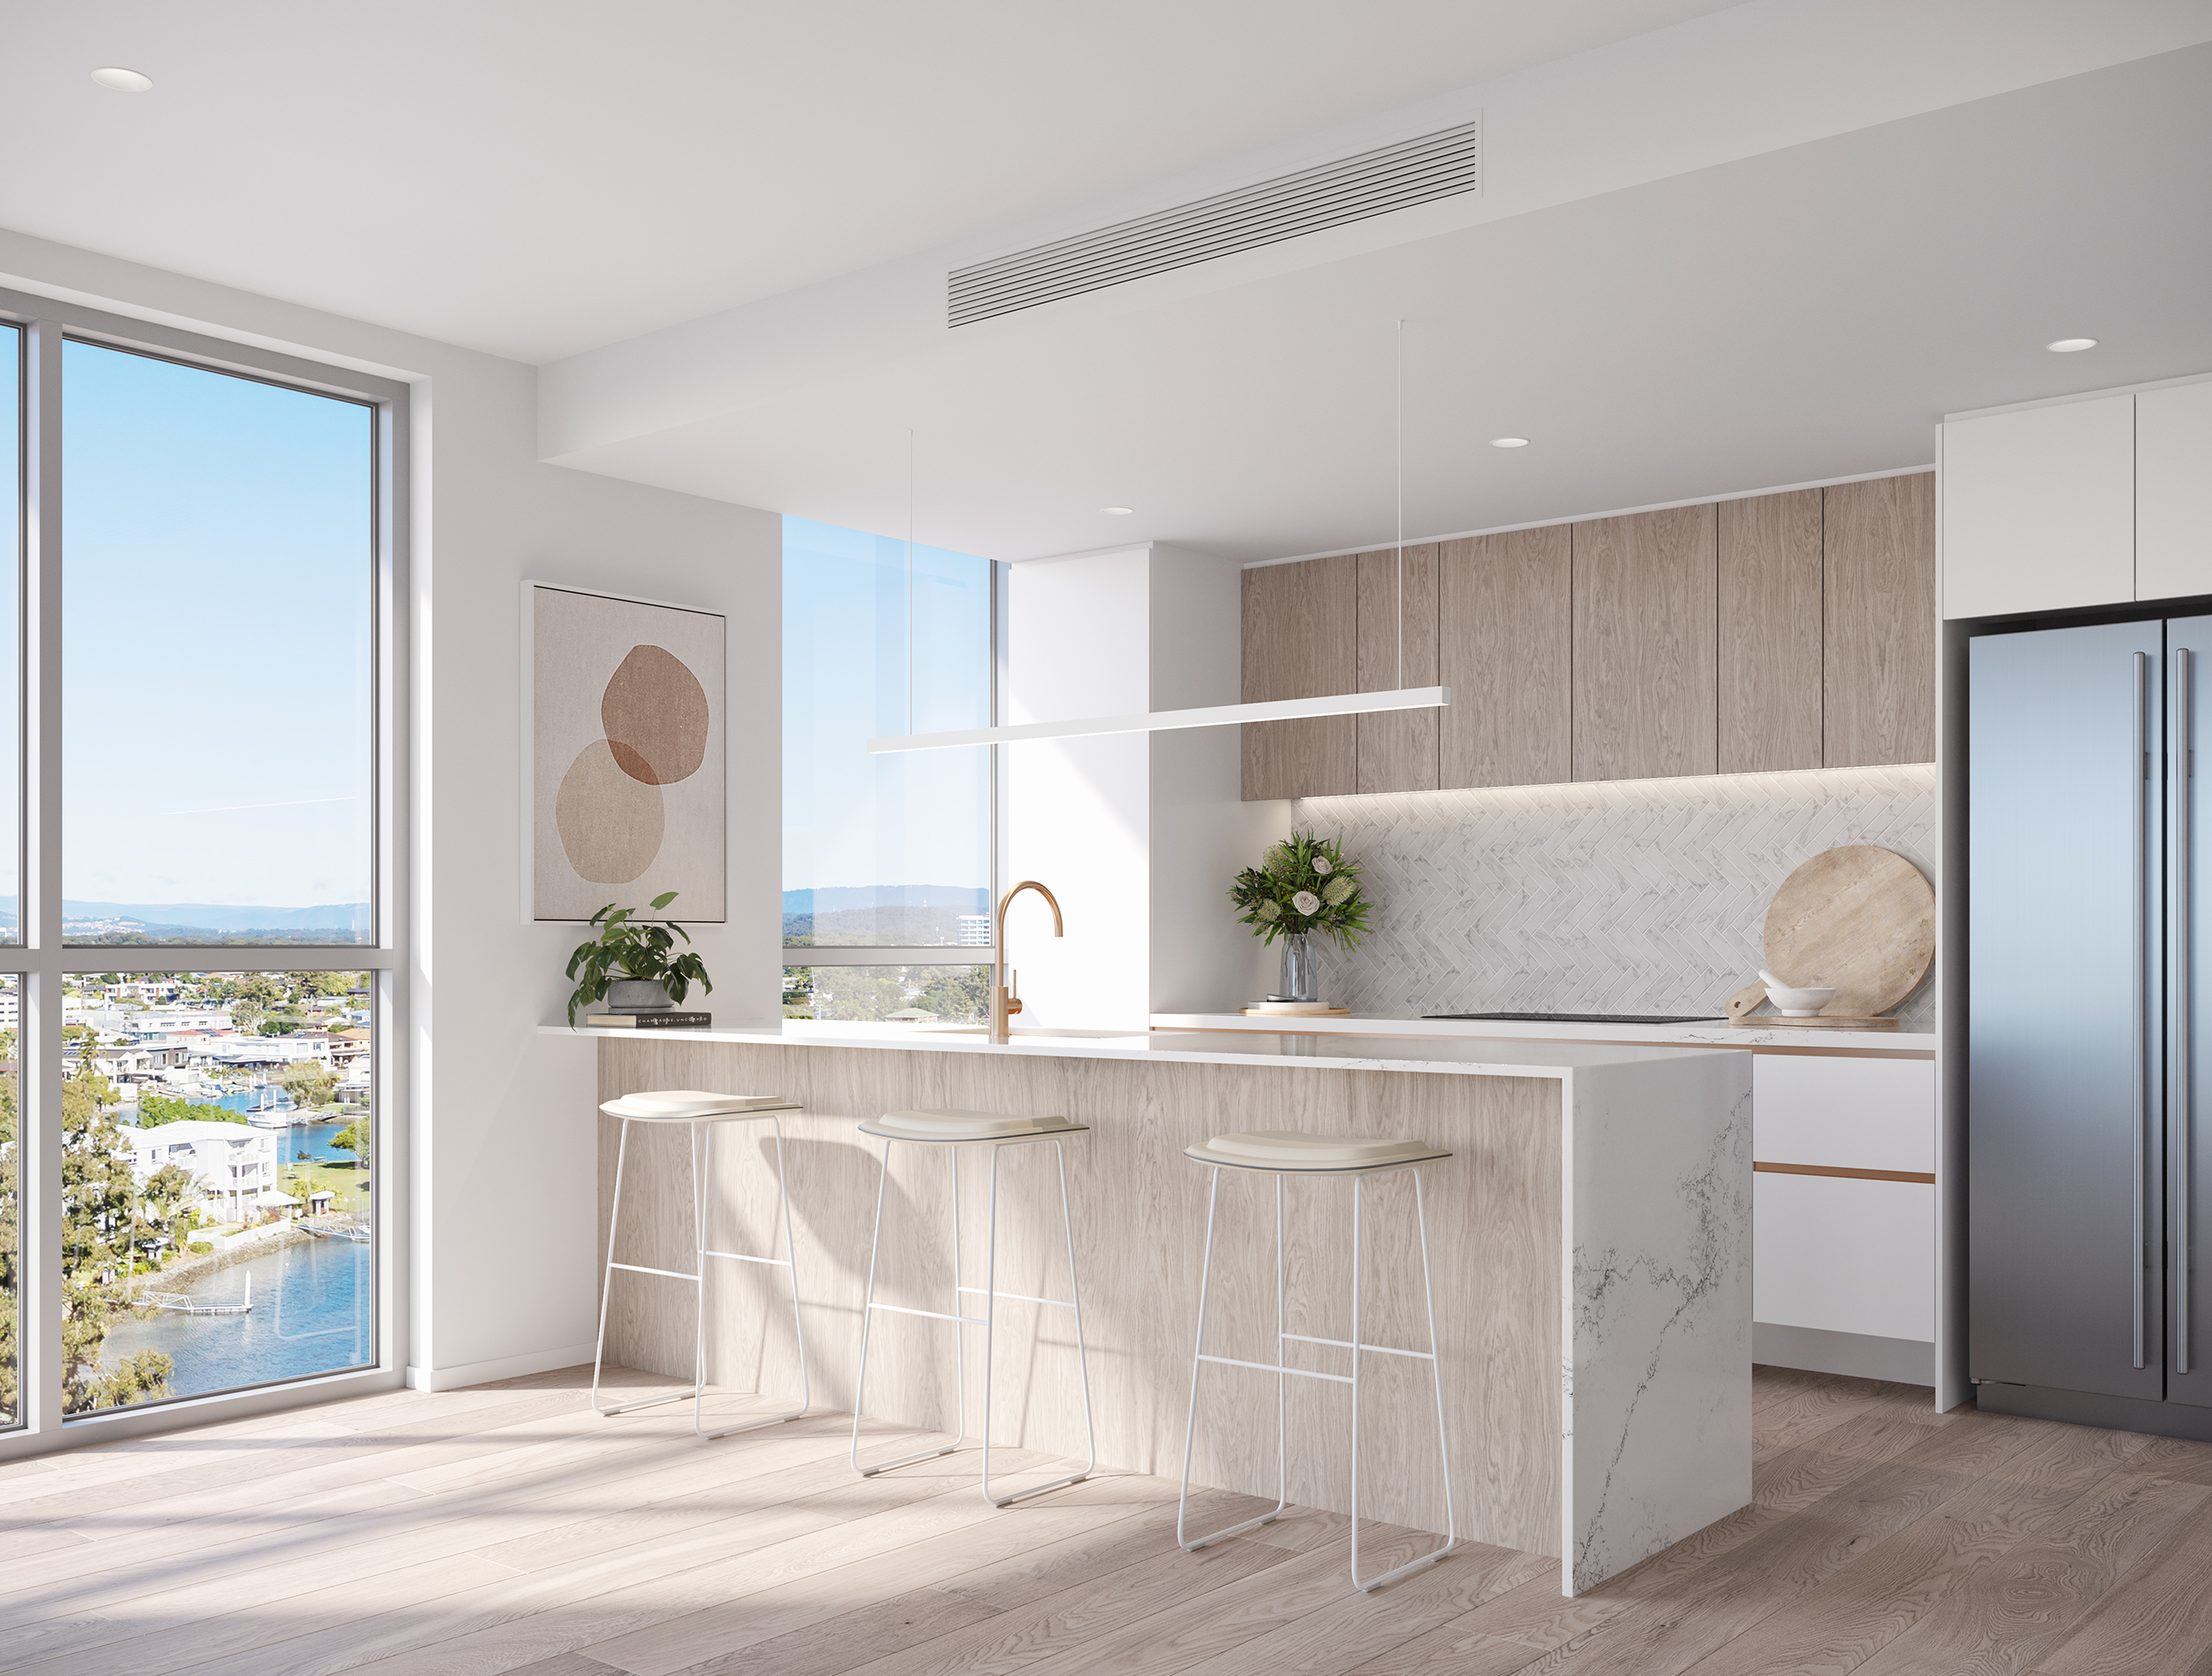 Stylish apartment kitchen with warm timber floors and elegant white marble counter benchtops. The kitchen features an island breakfast bar adorned with sleek metal stools, while floor-to-ceiling glazing floods the interior spaces with abundant natural light.